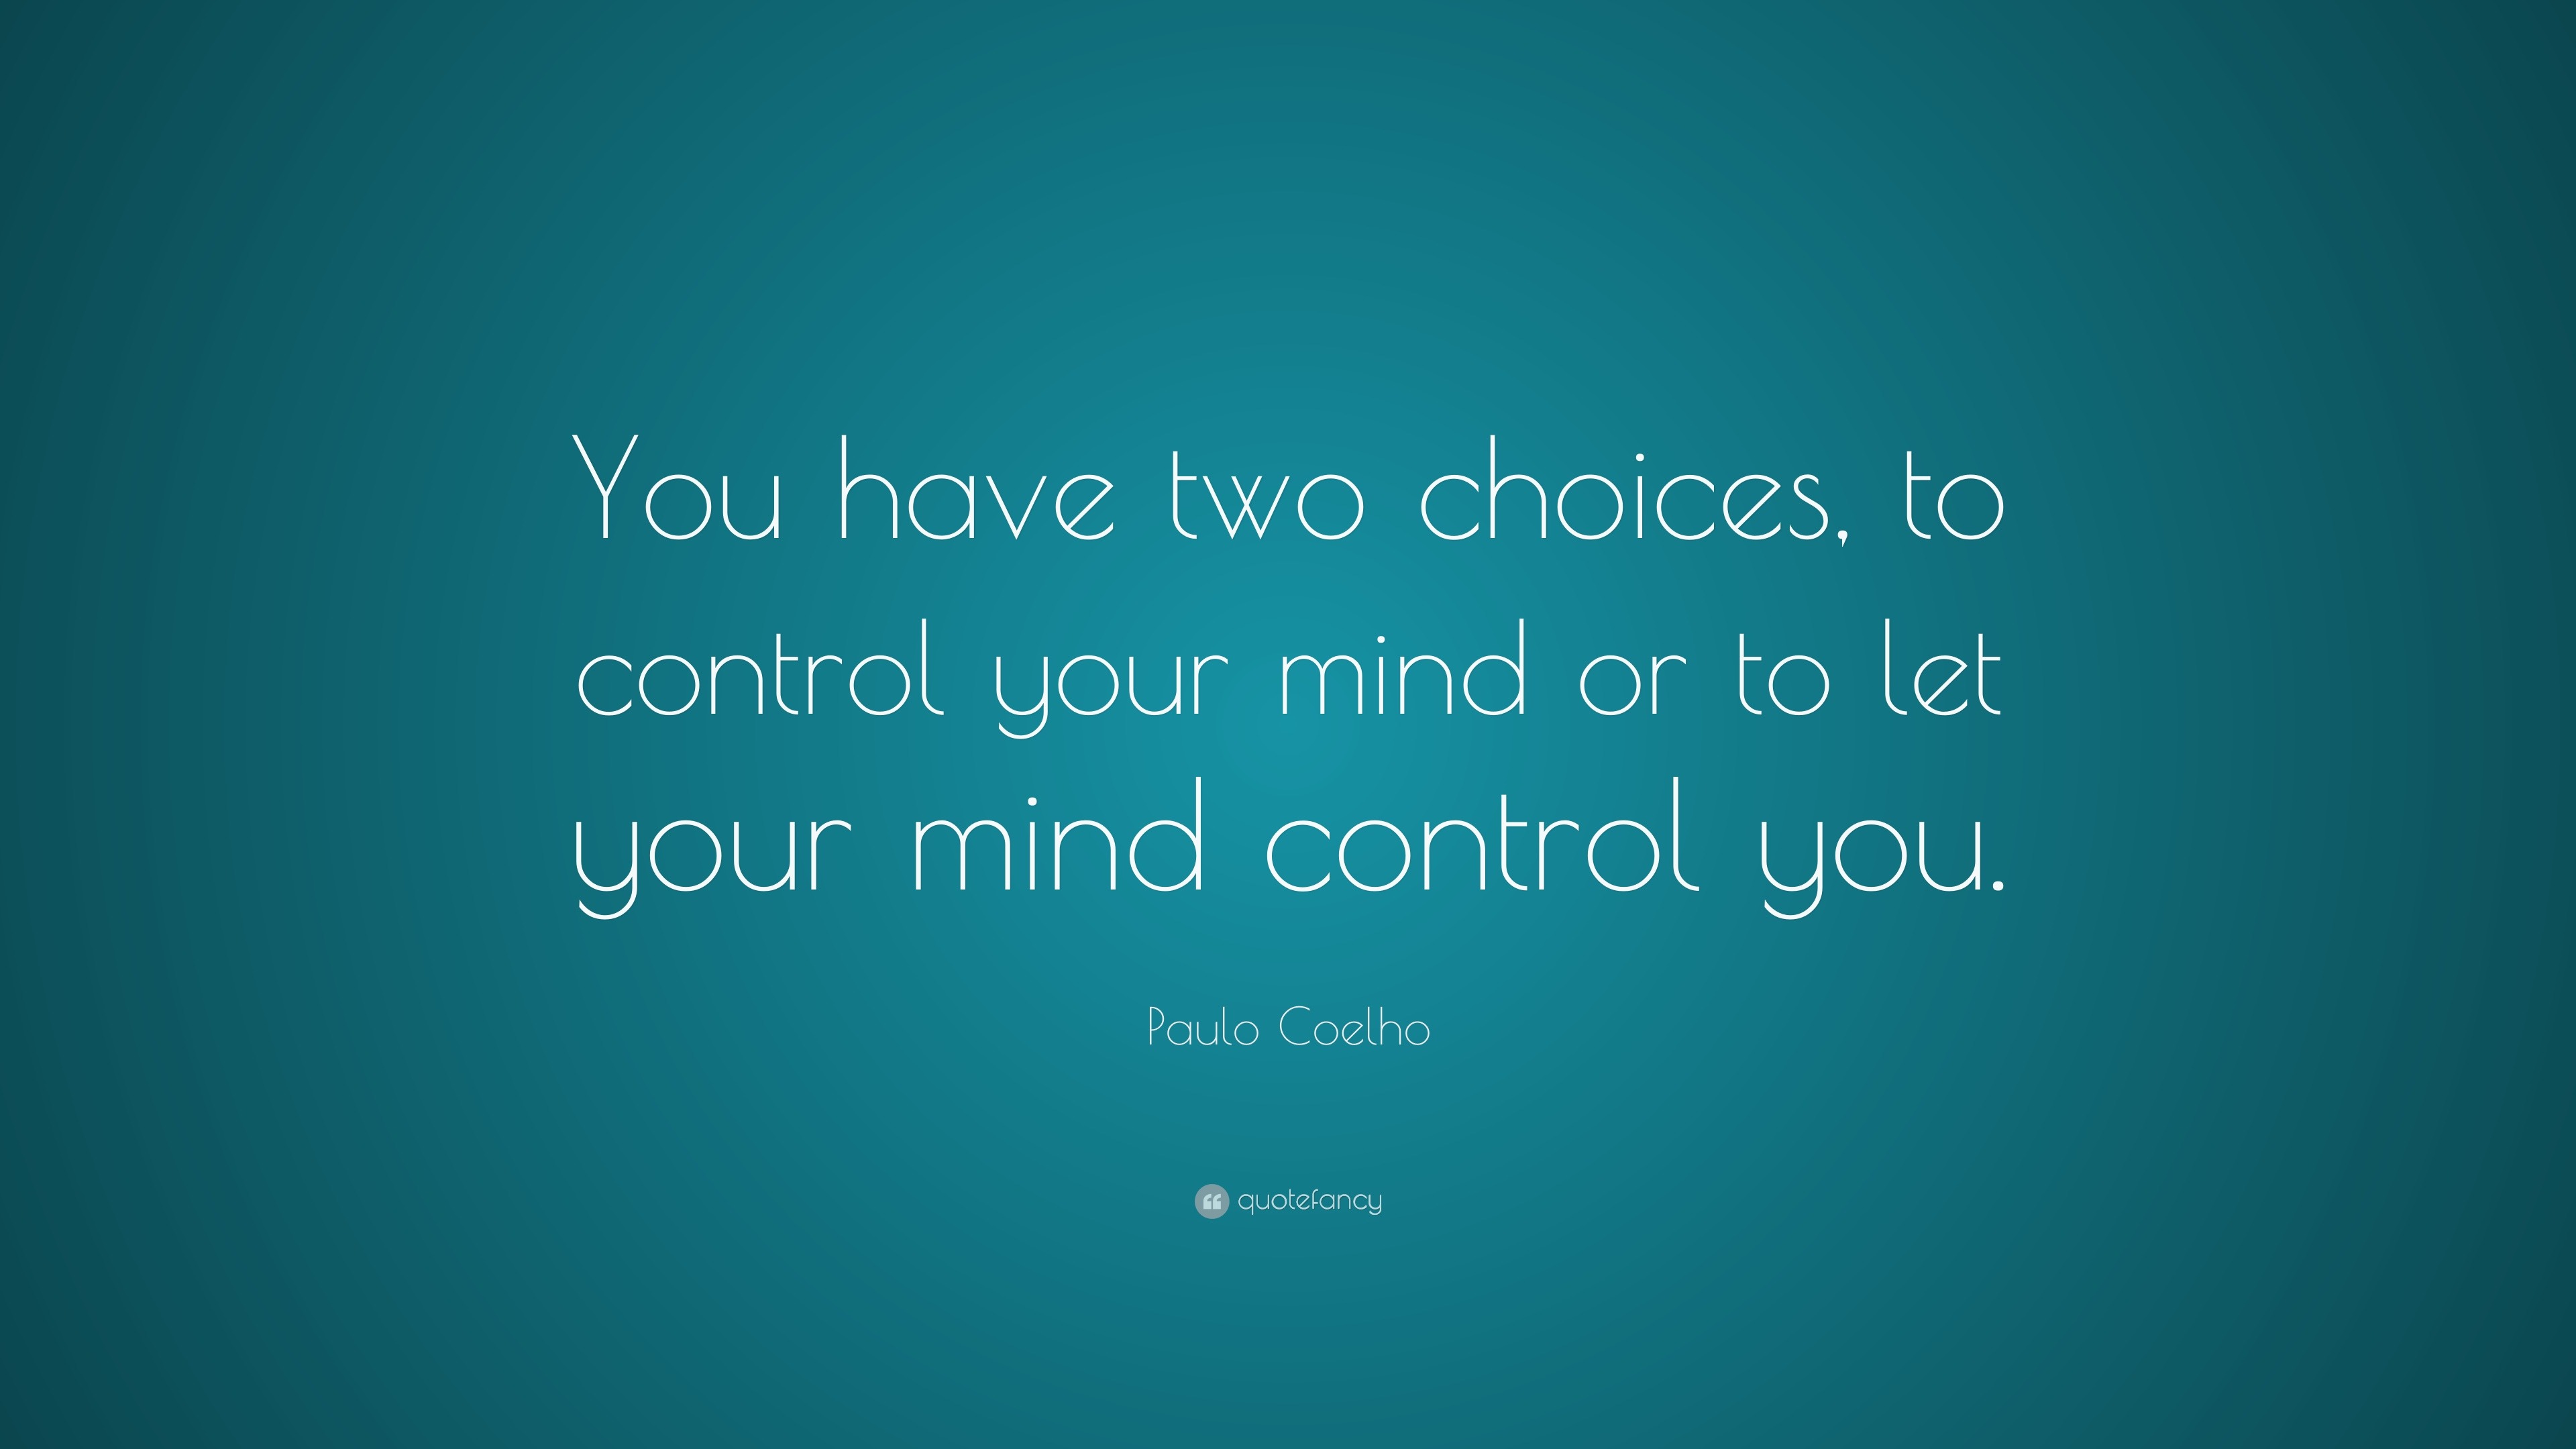  mind or to let your mind control you.” 10 wallpapers  Quotefancy